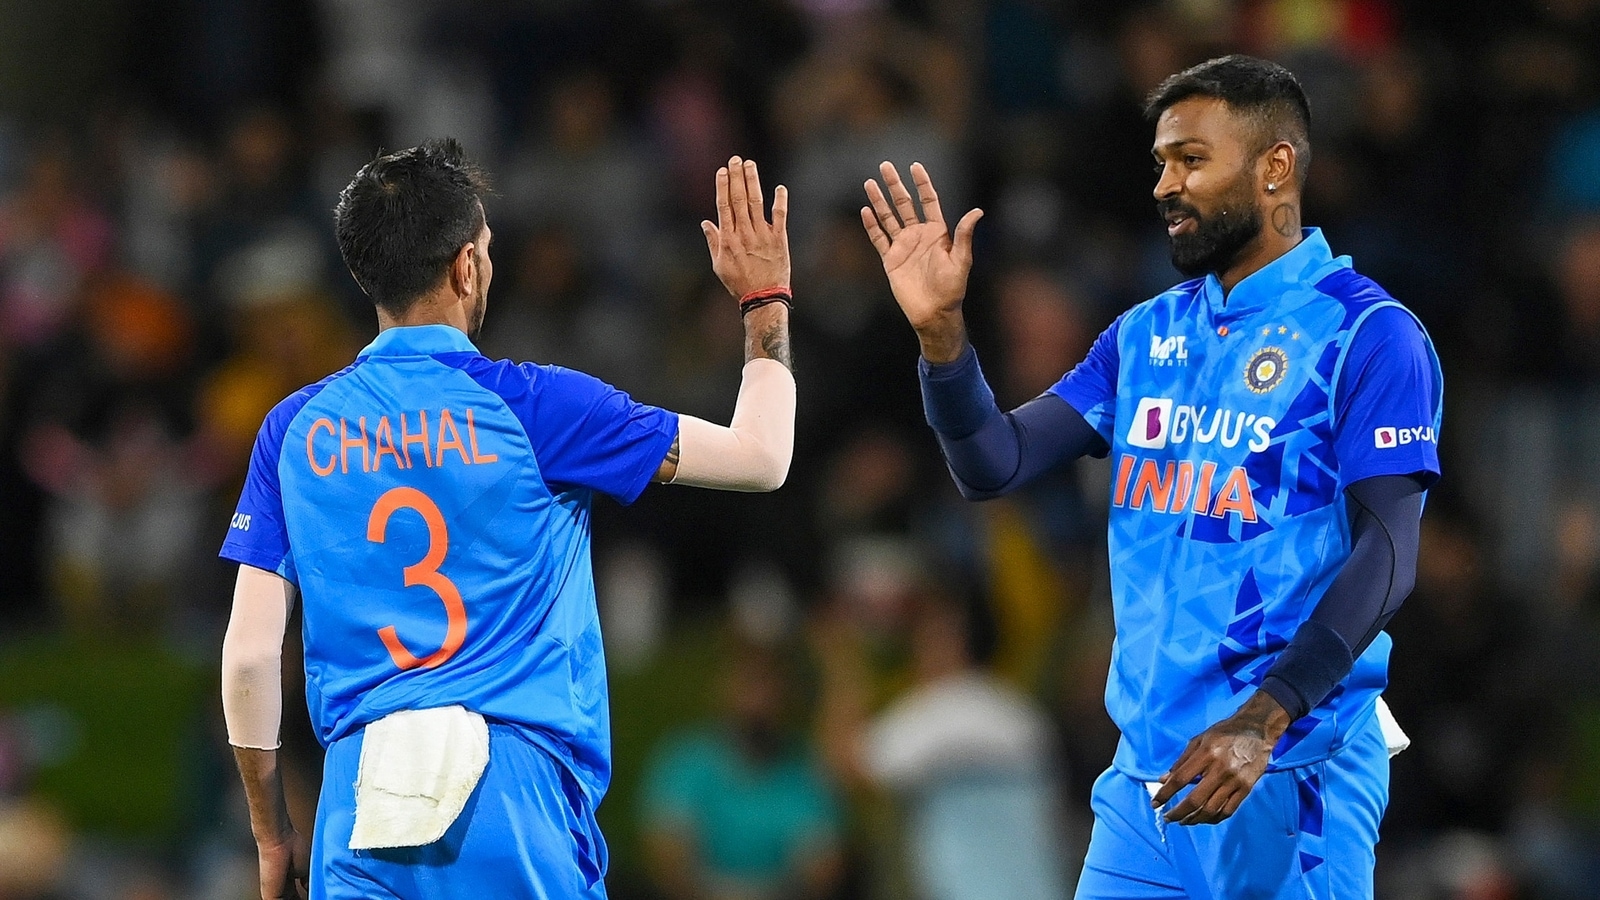 India vs Sri Lanka 1st T20I Live Streaming When and Where to watch IND vs SL Cricket